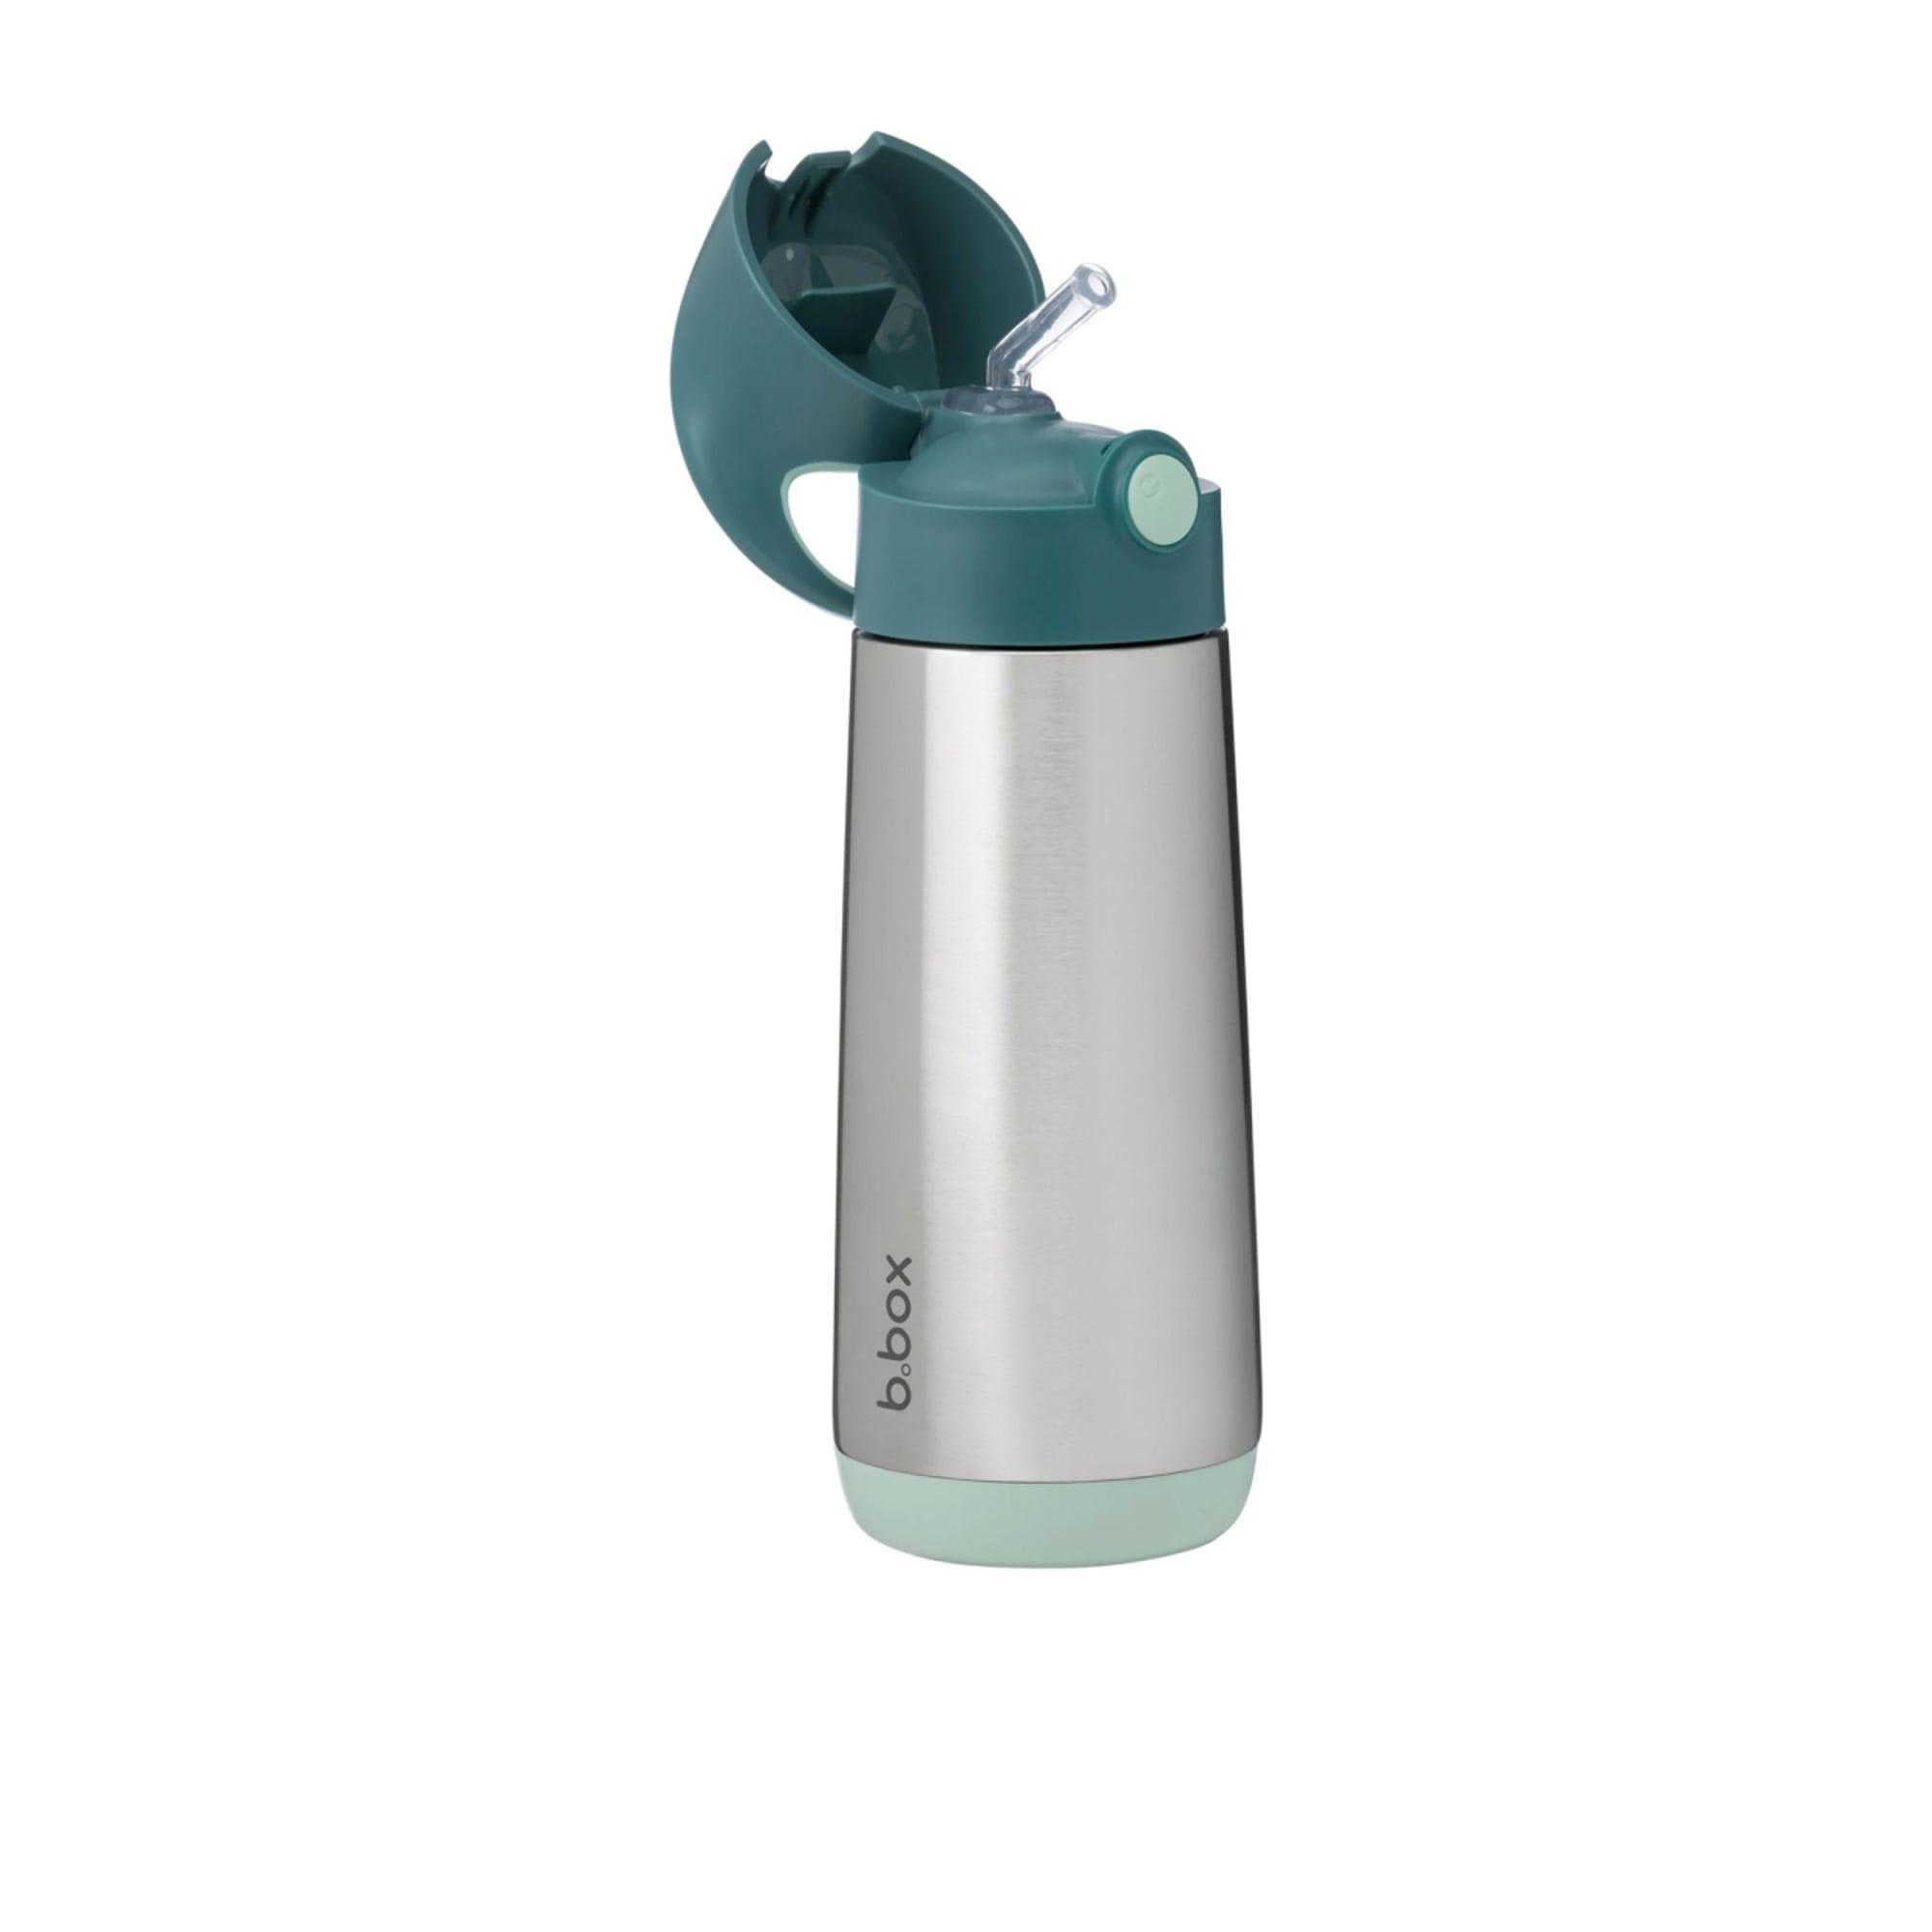 b.box Insulated Drink Bottle 500ml Emerald Forest Image 5